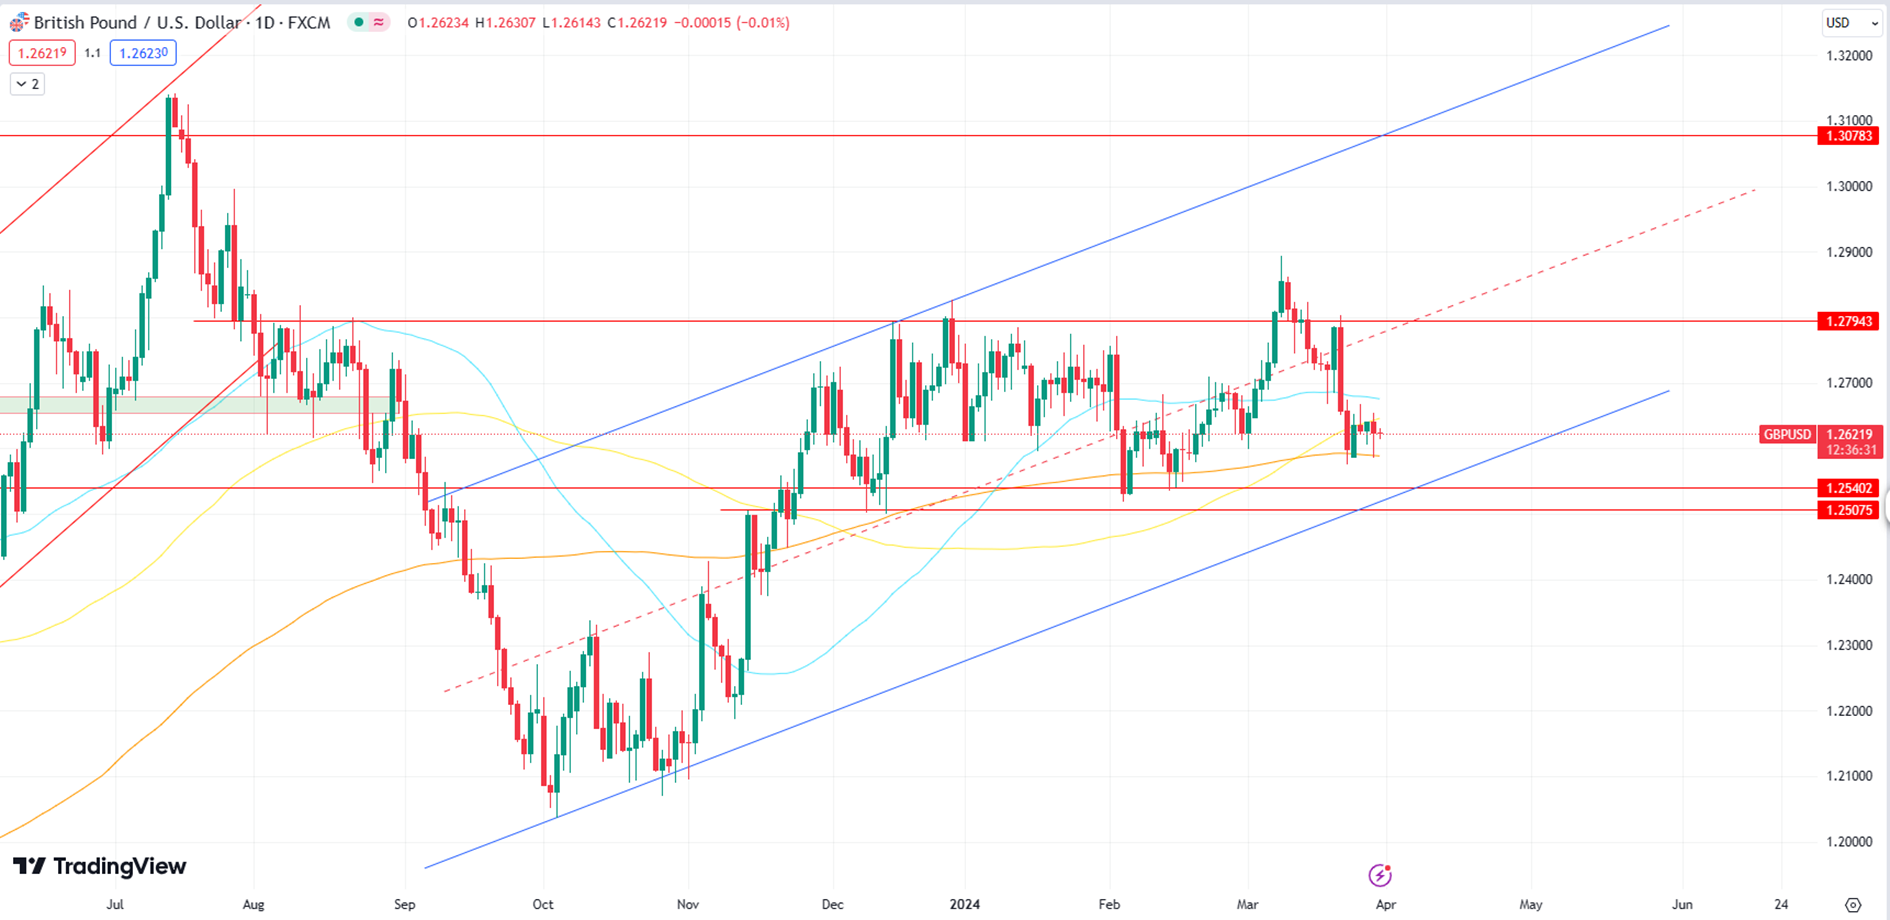 GBP/USD Reaches 1.2600 Support Level at 200 MA